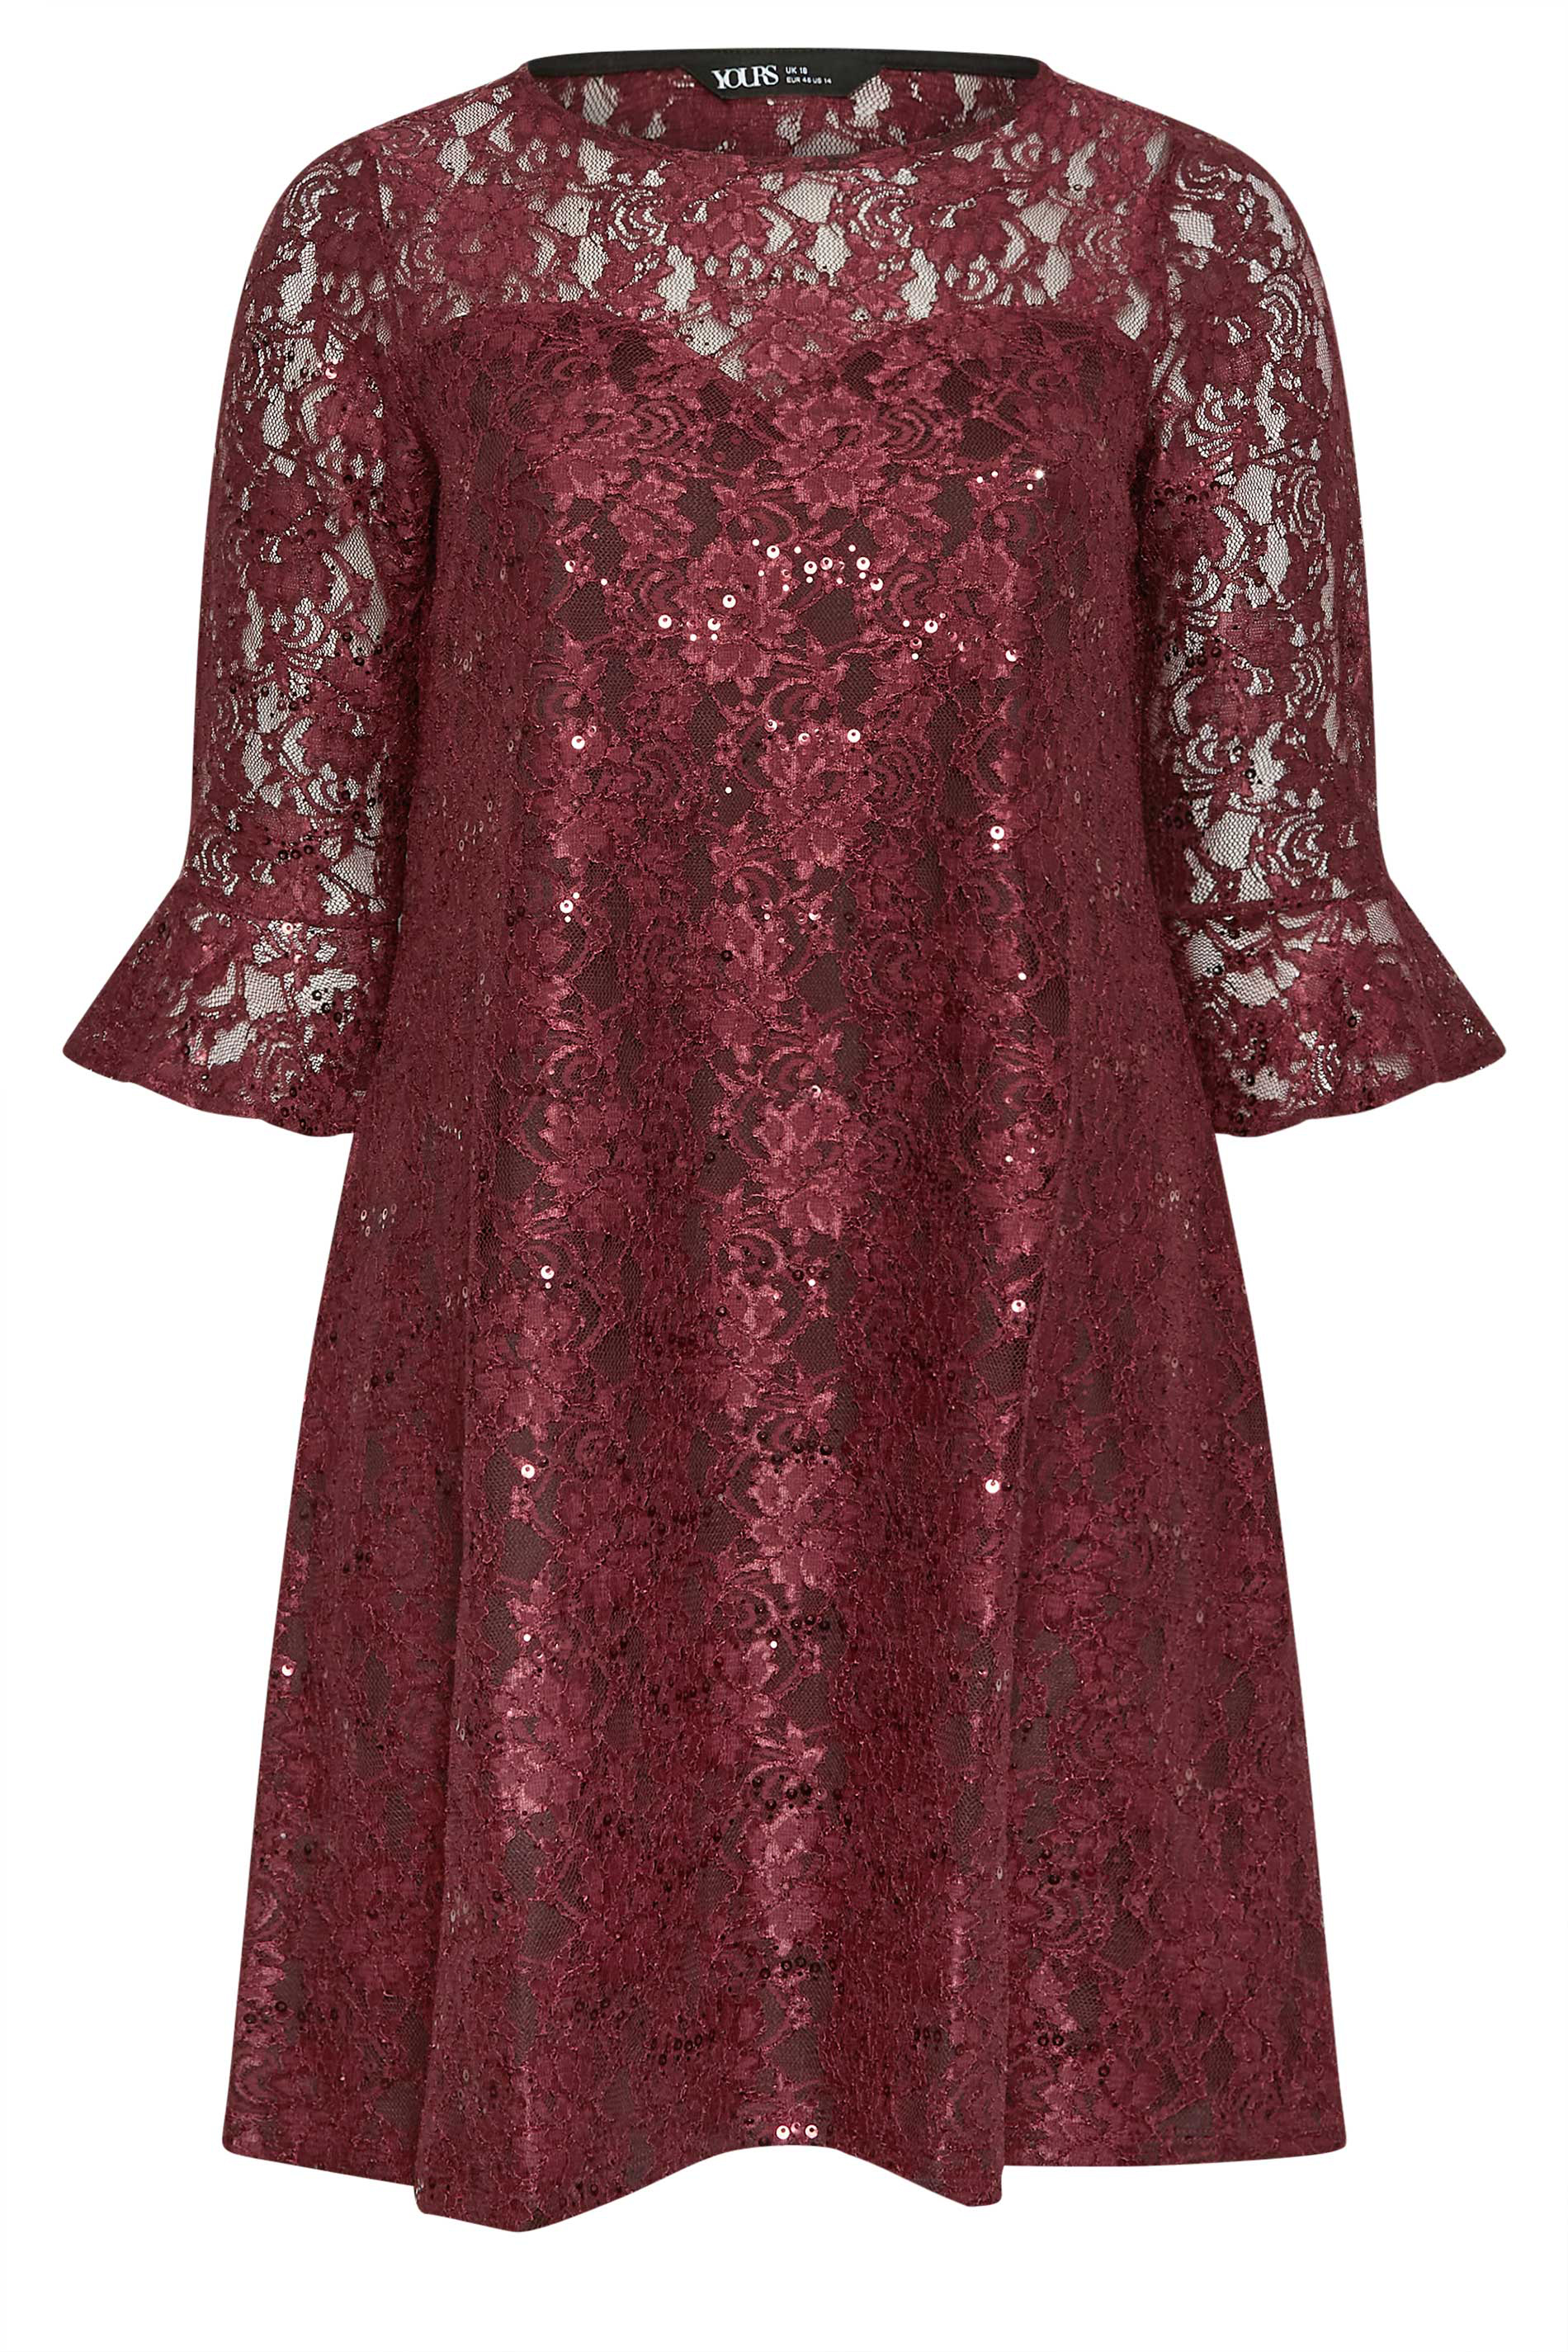 YOURS Plus Size Burgundy Red Lace Sequin Embellished Swing Dress ...